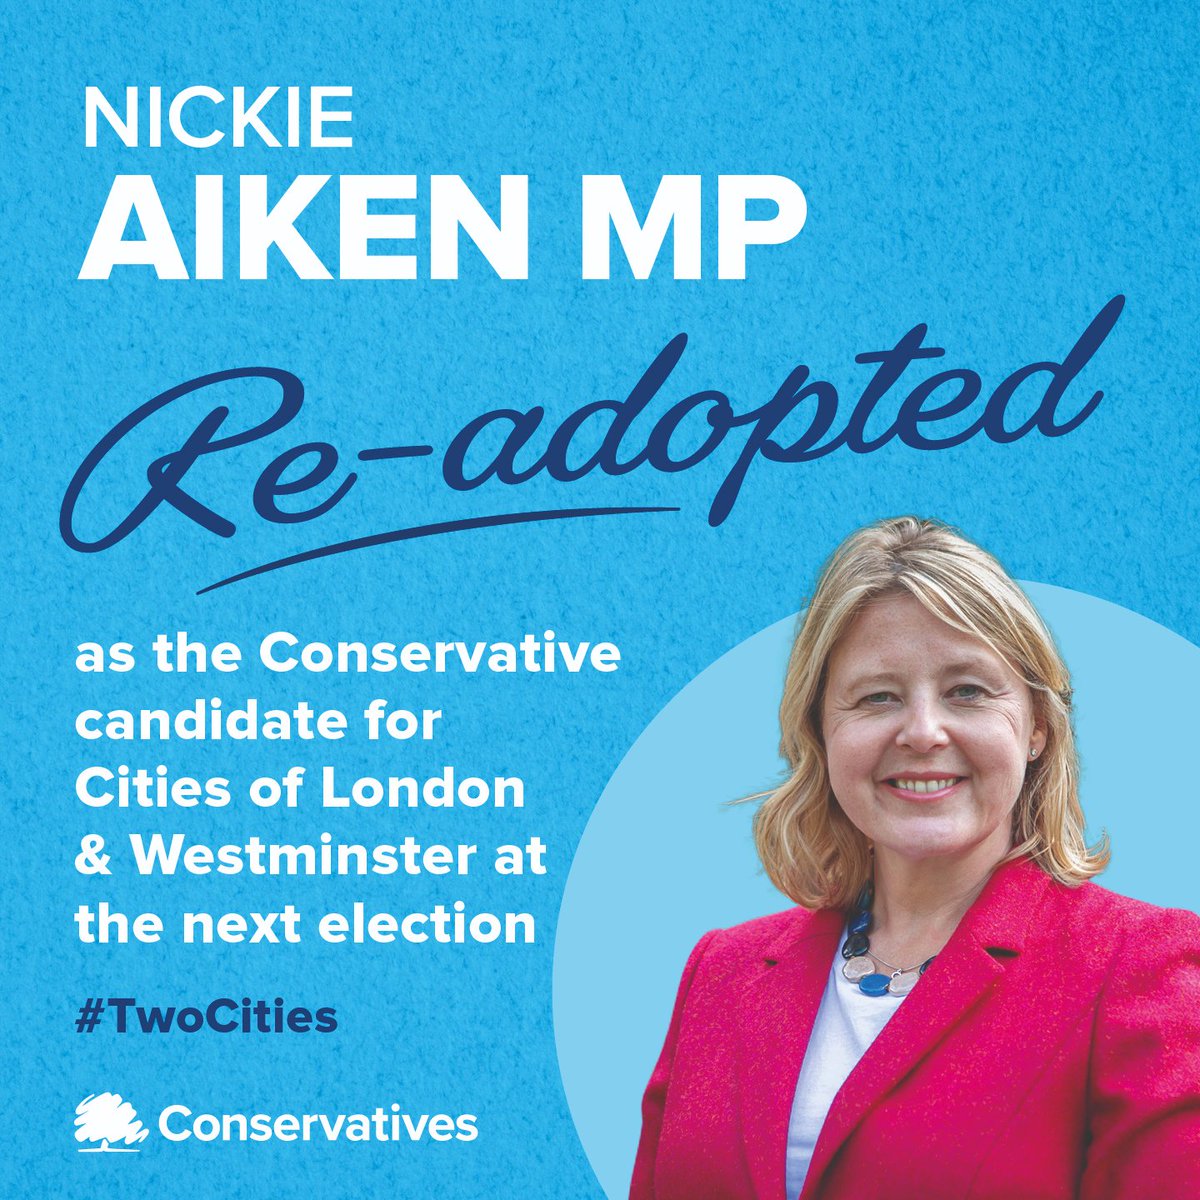 Our MP @twocitiesnickie has been a strong local voice for the Cities of London & Westminster since 2019: we're delighted to have re-adopted her as our @conservatives candidate #TwoCities #StrongLocalVoice #commitment 🙌